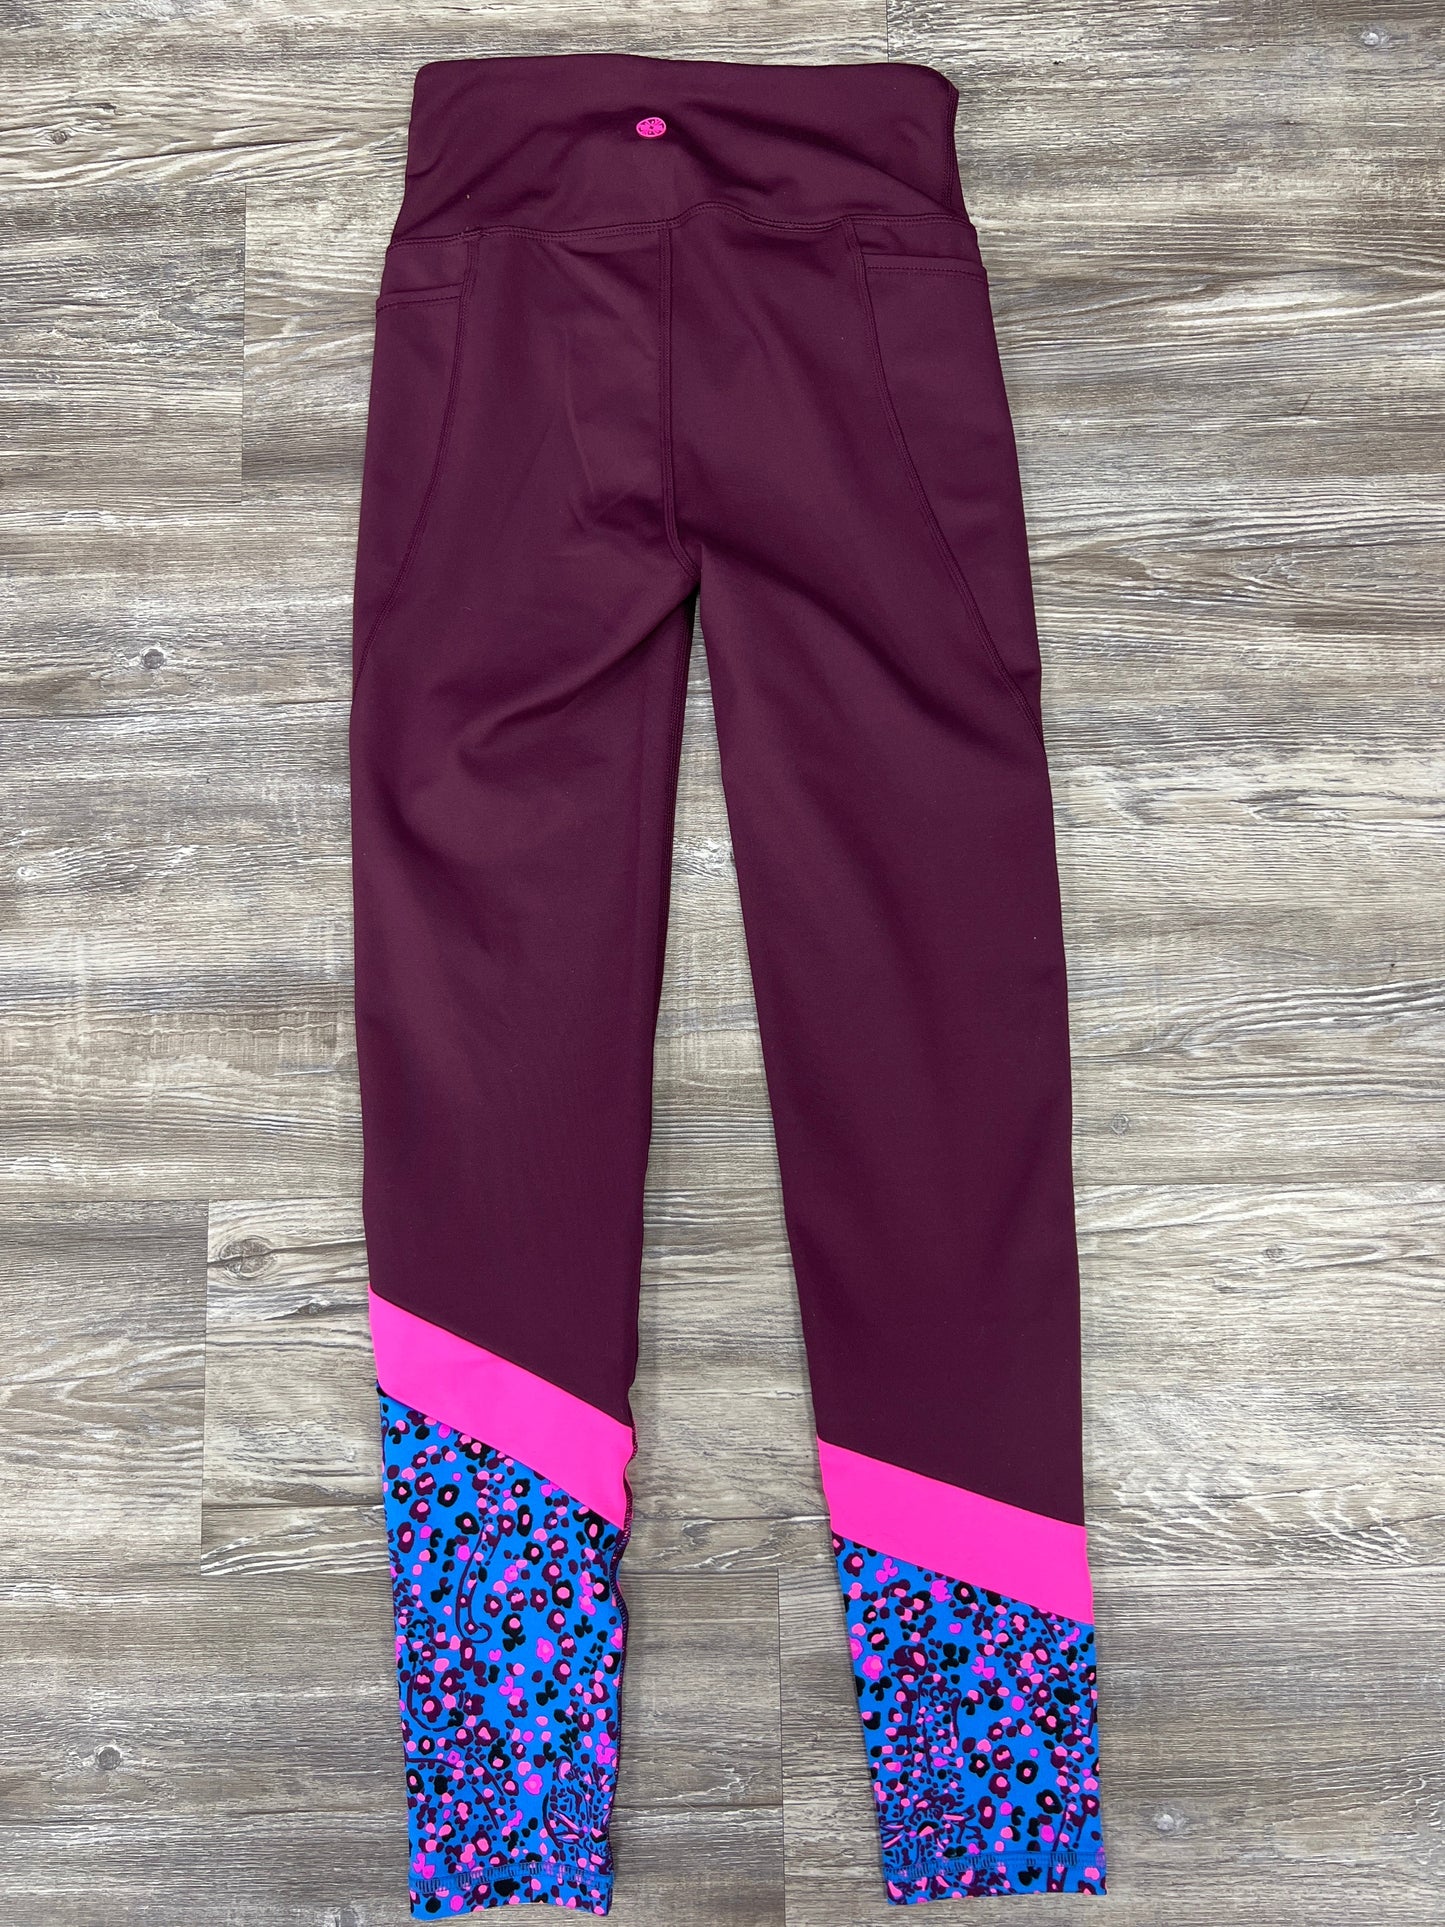 Athletic Leggings By Lilly Pulitzer Size: Xs